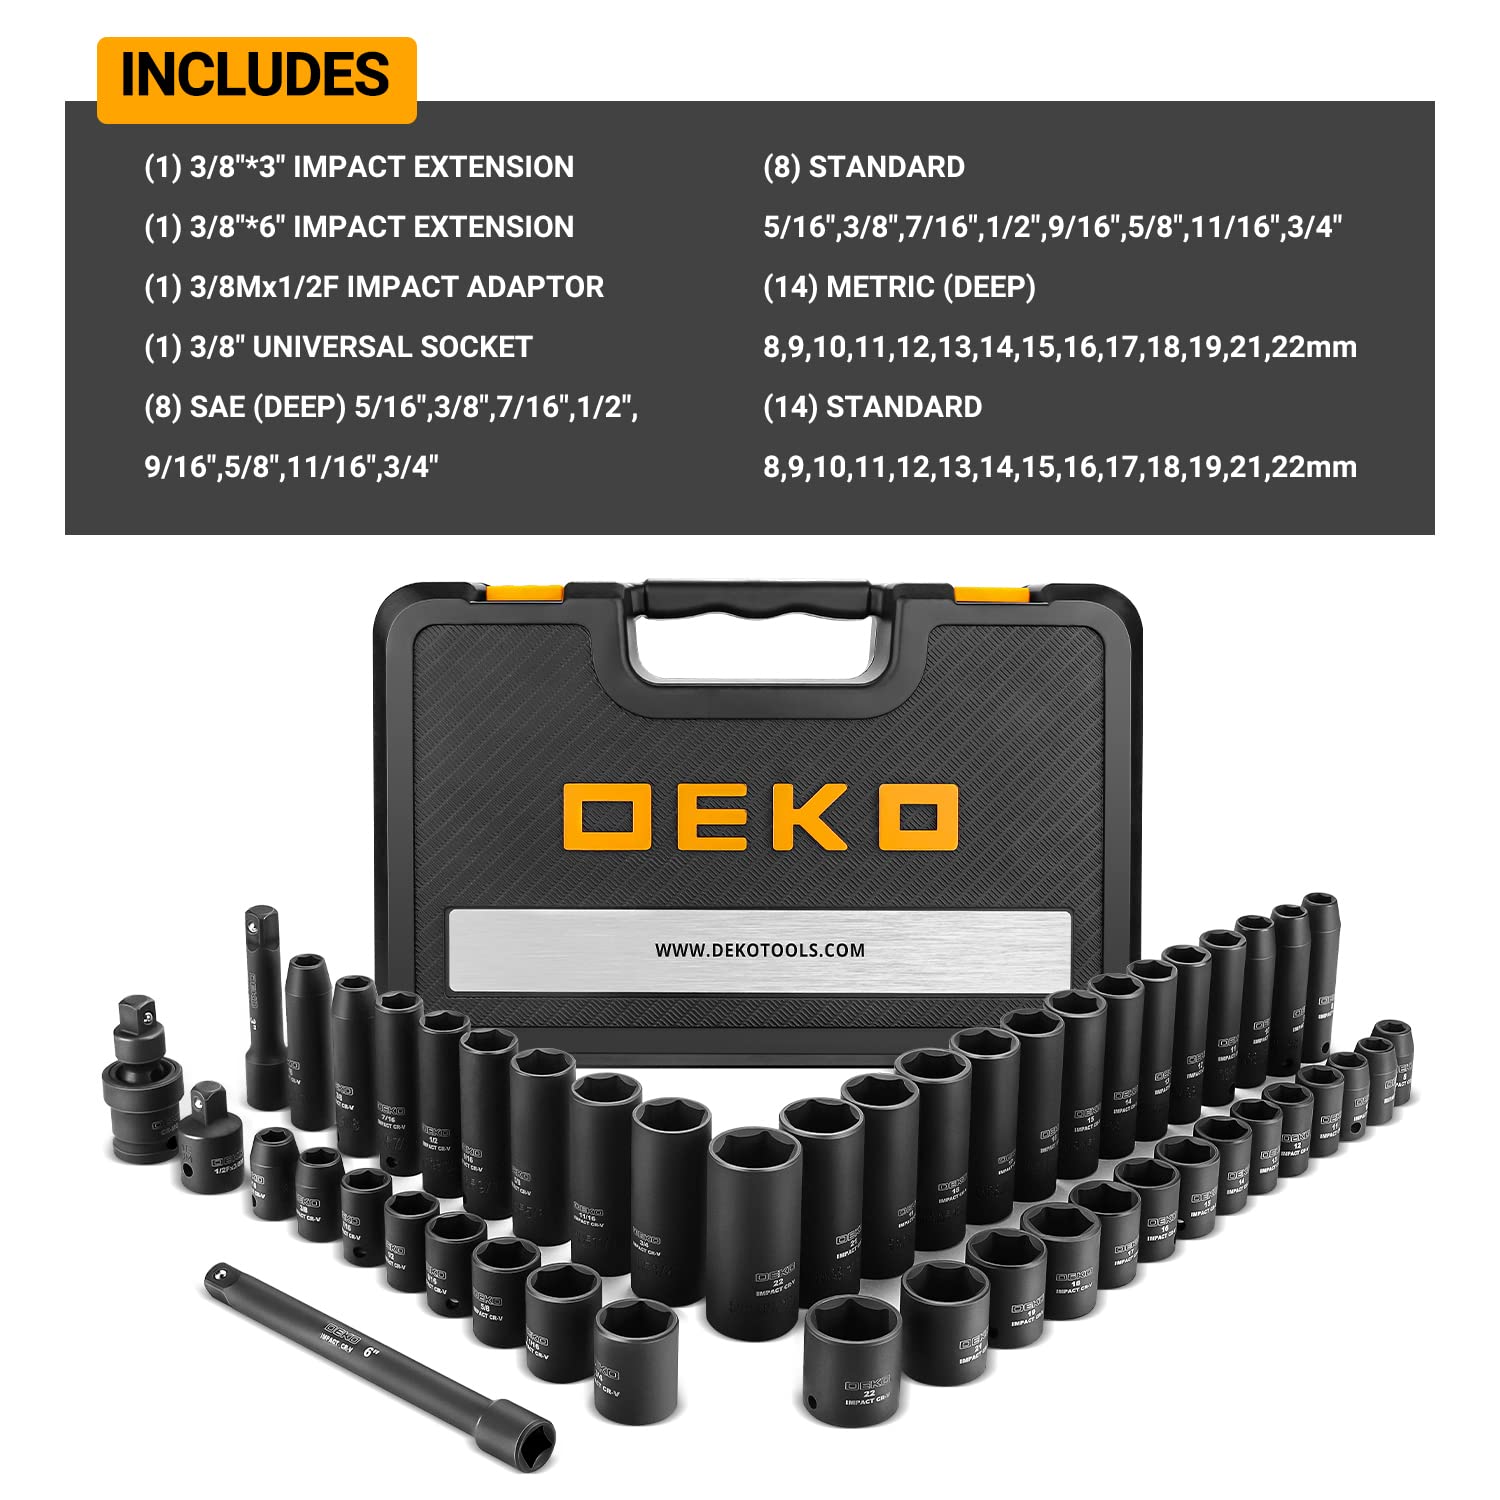 DEKOPRO 48 Piece 3/8-inch Drive 6 Point Impact Socket Set, Standard and Deep, Metric and SAE, CR-V Steel with Extension Bar and Universal Joints